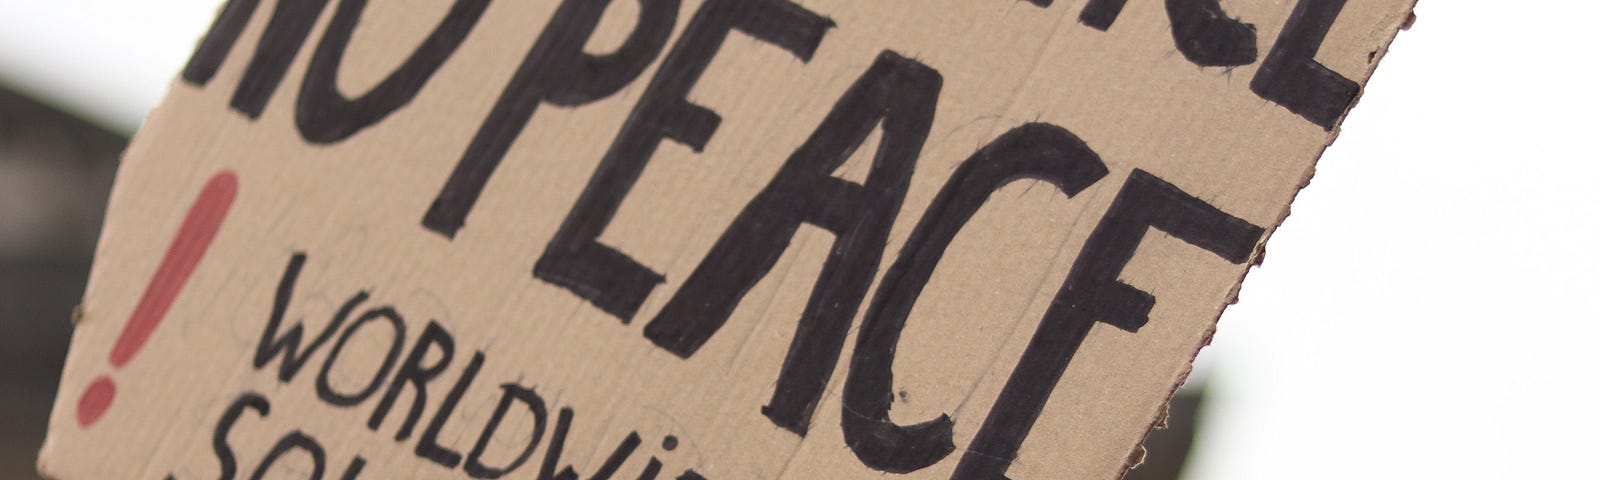 A cardboard sign help up at a protest. It reads “No Justice, No Peace. Worldwide Solidarity.”